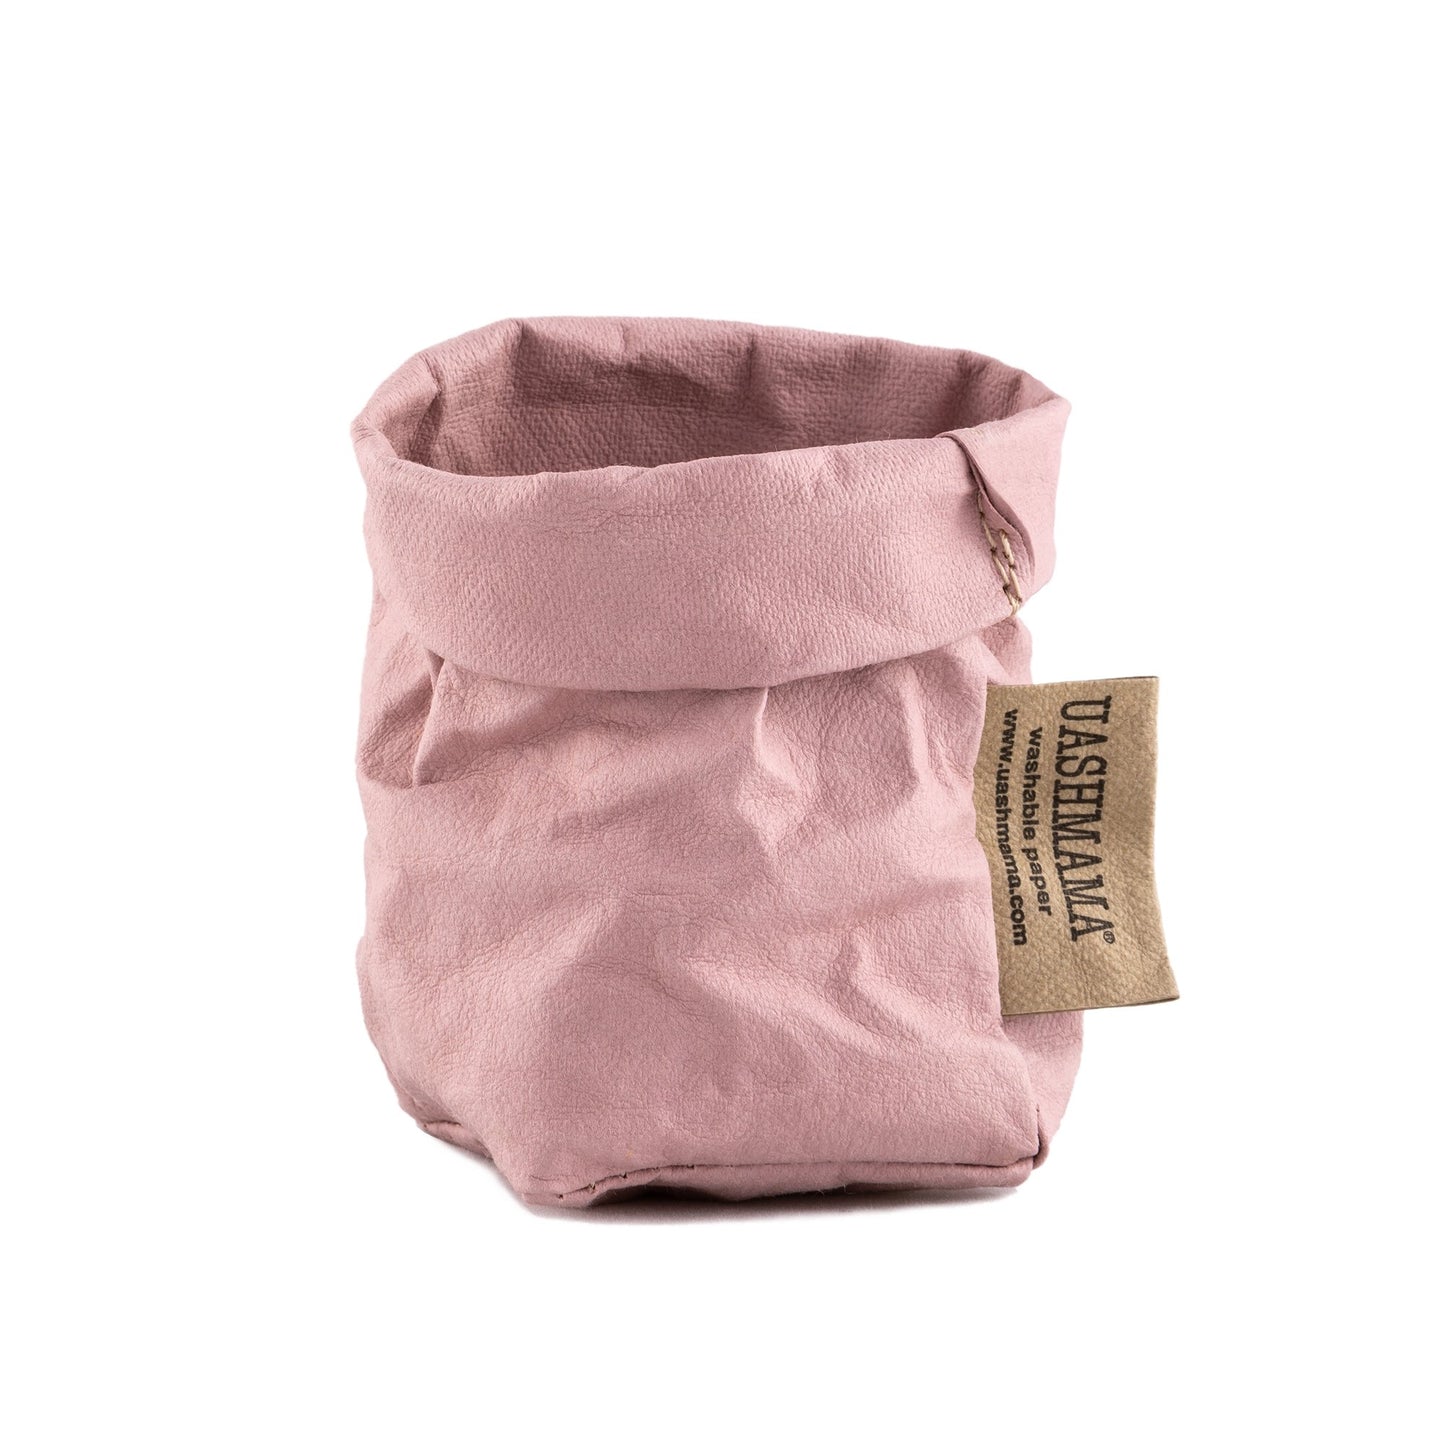 A washable paper bag is shown. The bag is rolled down at the top and features a UASHMAMA logo label on the bottom left corner. The bag pictured is the extra small size in pale pink.